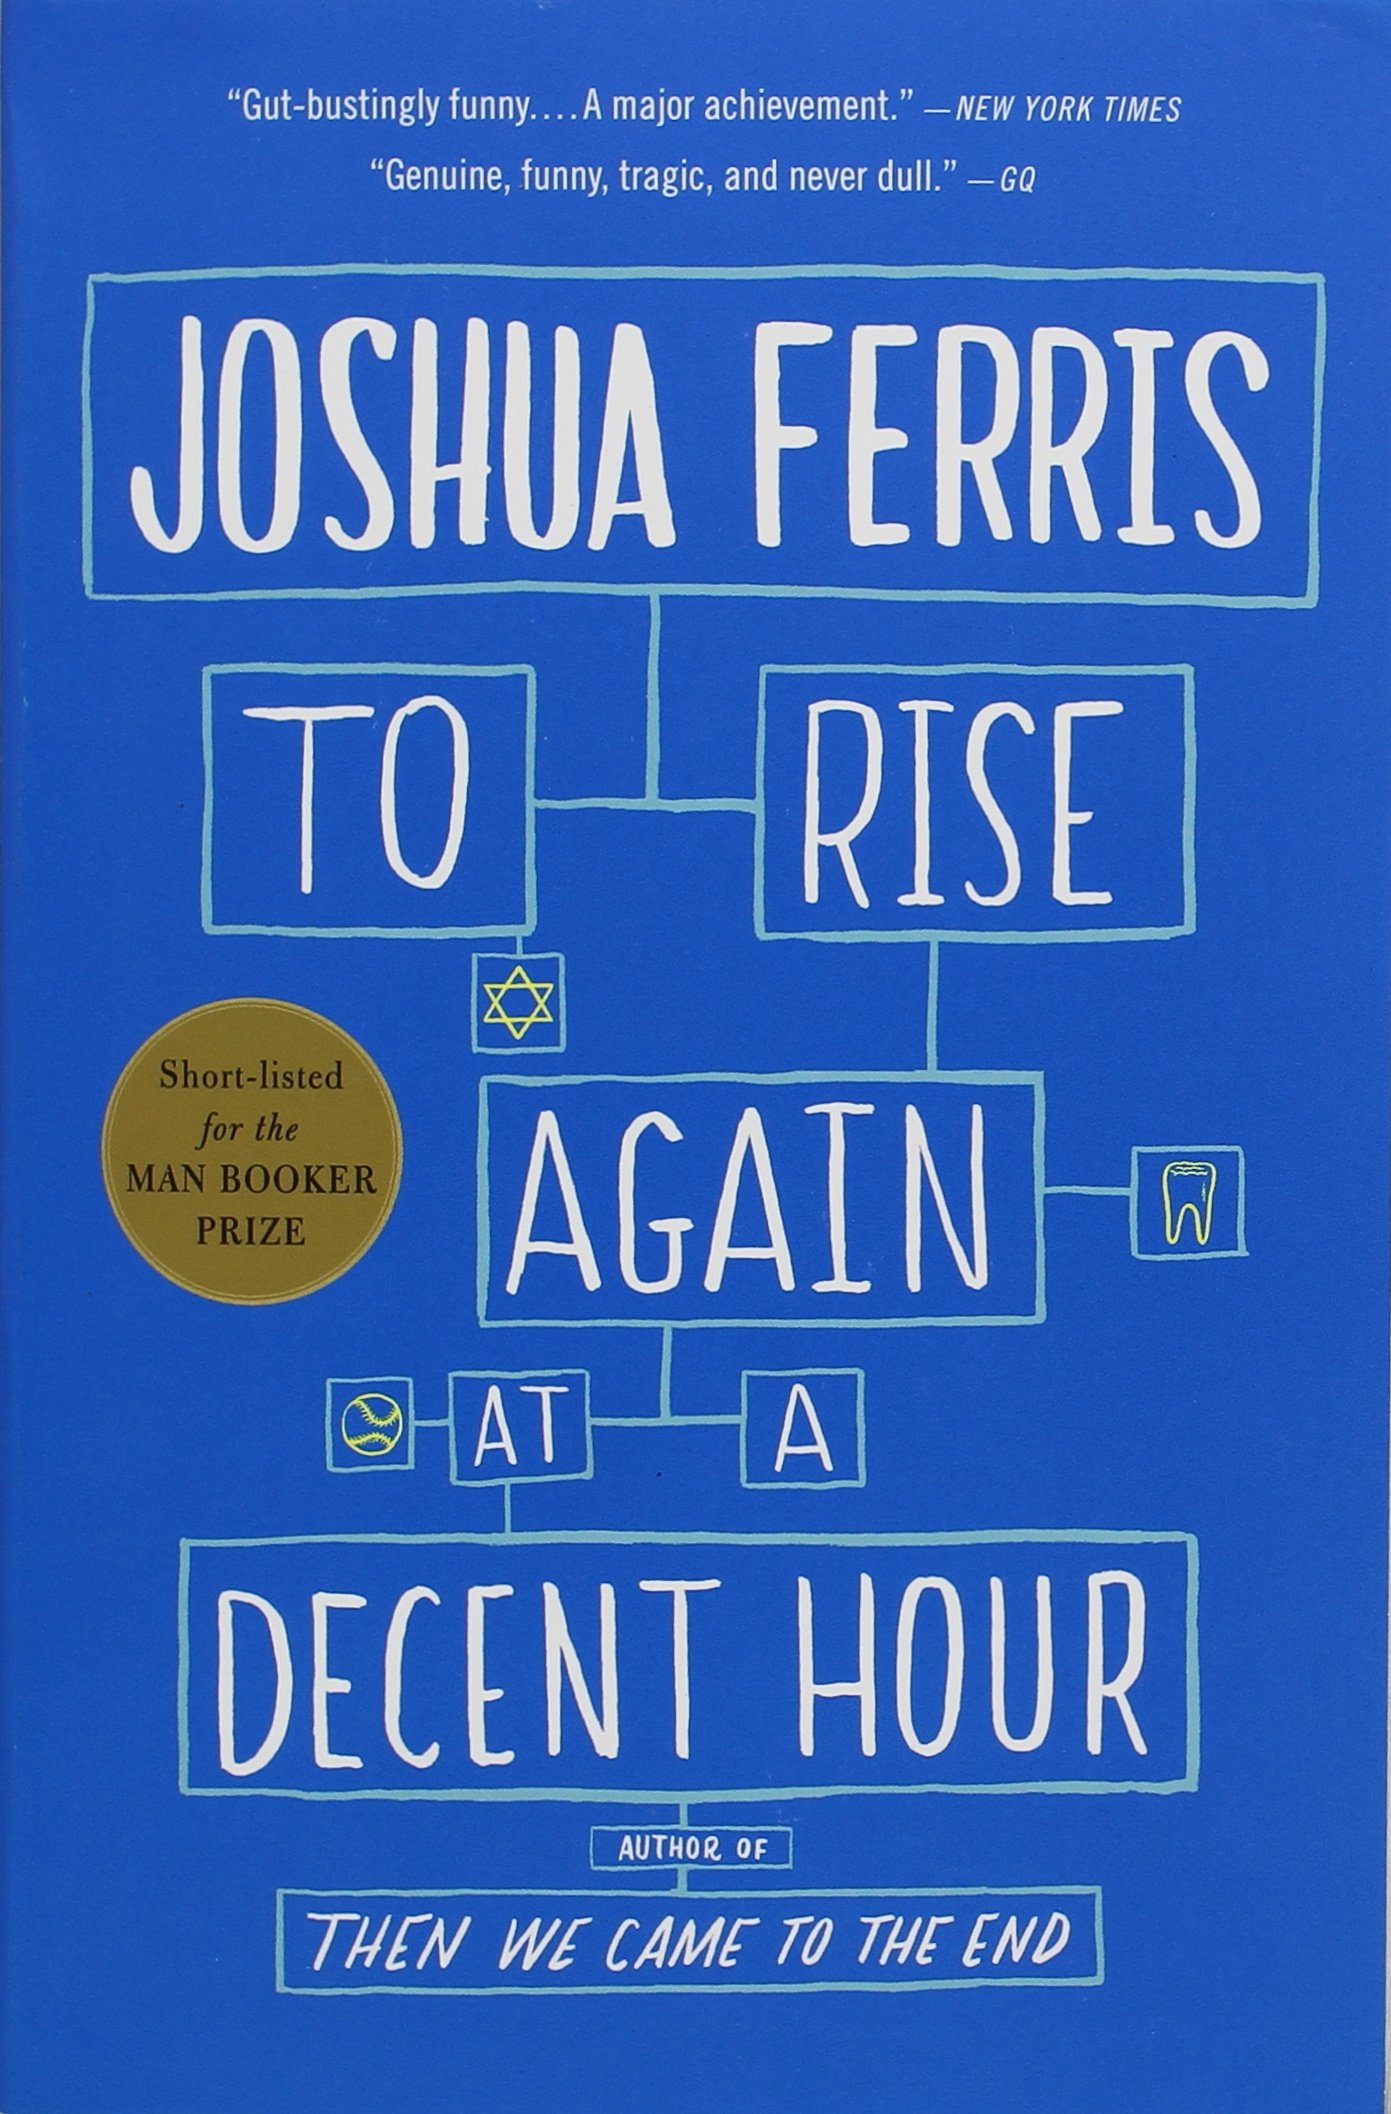 To Rise Again at Decent Hour by Joshua Ferris